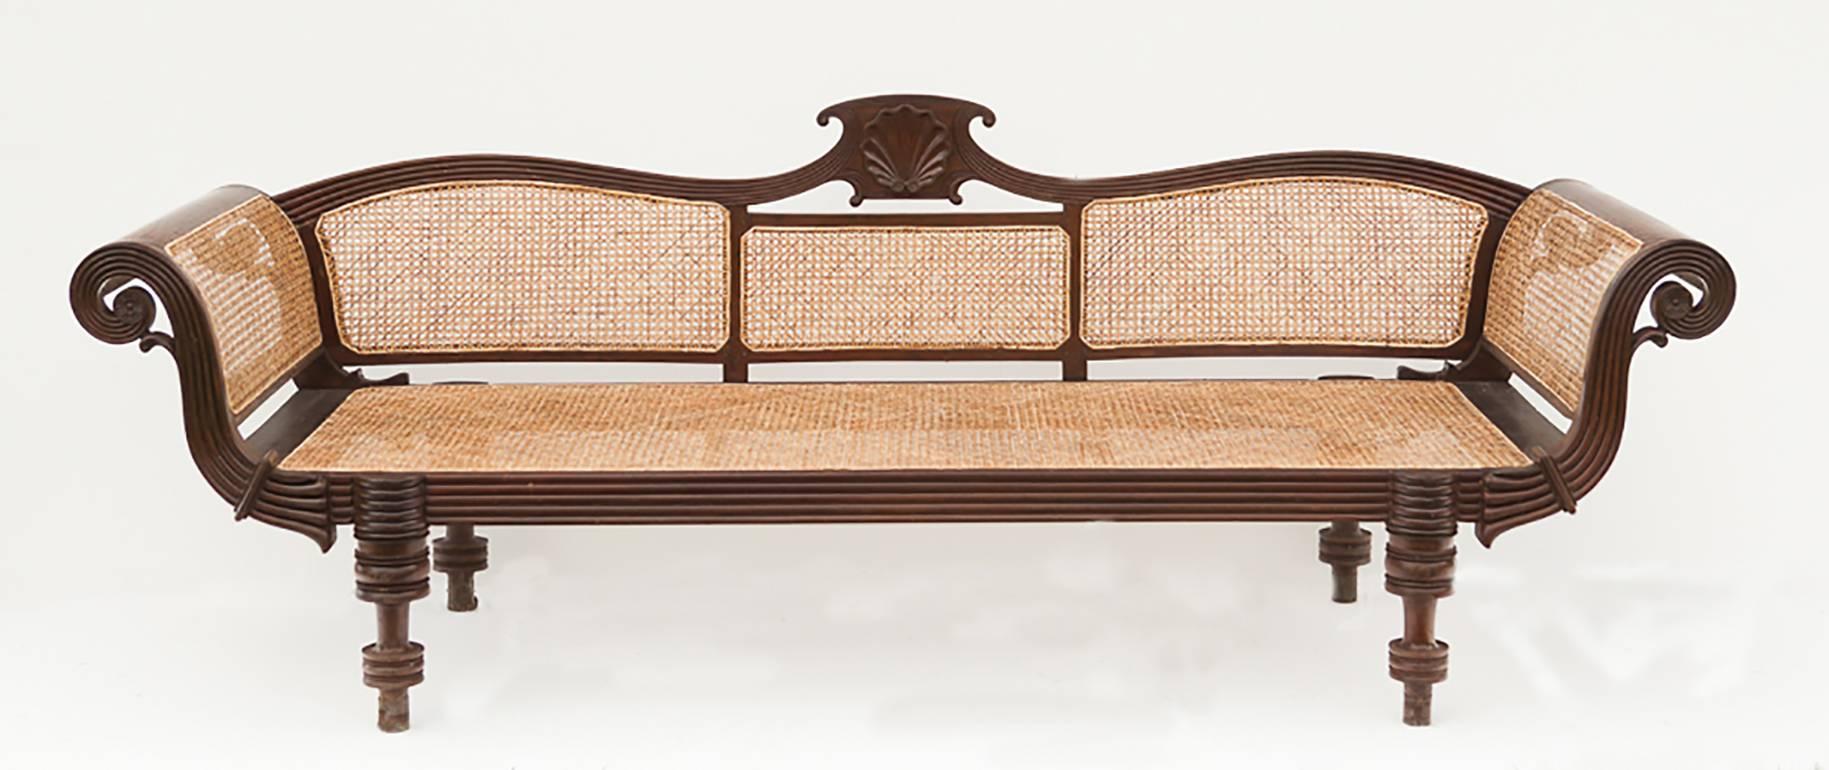 Late 19th century British Colonial caned settee carved from tropical hardwood. This long, graceful Anglo-Indian sofa features rolled arms, turned legs and culminates in a carved clamshell crest. An exceptional and authentic piece of history from